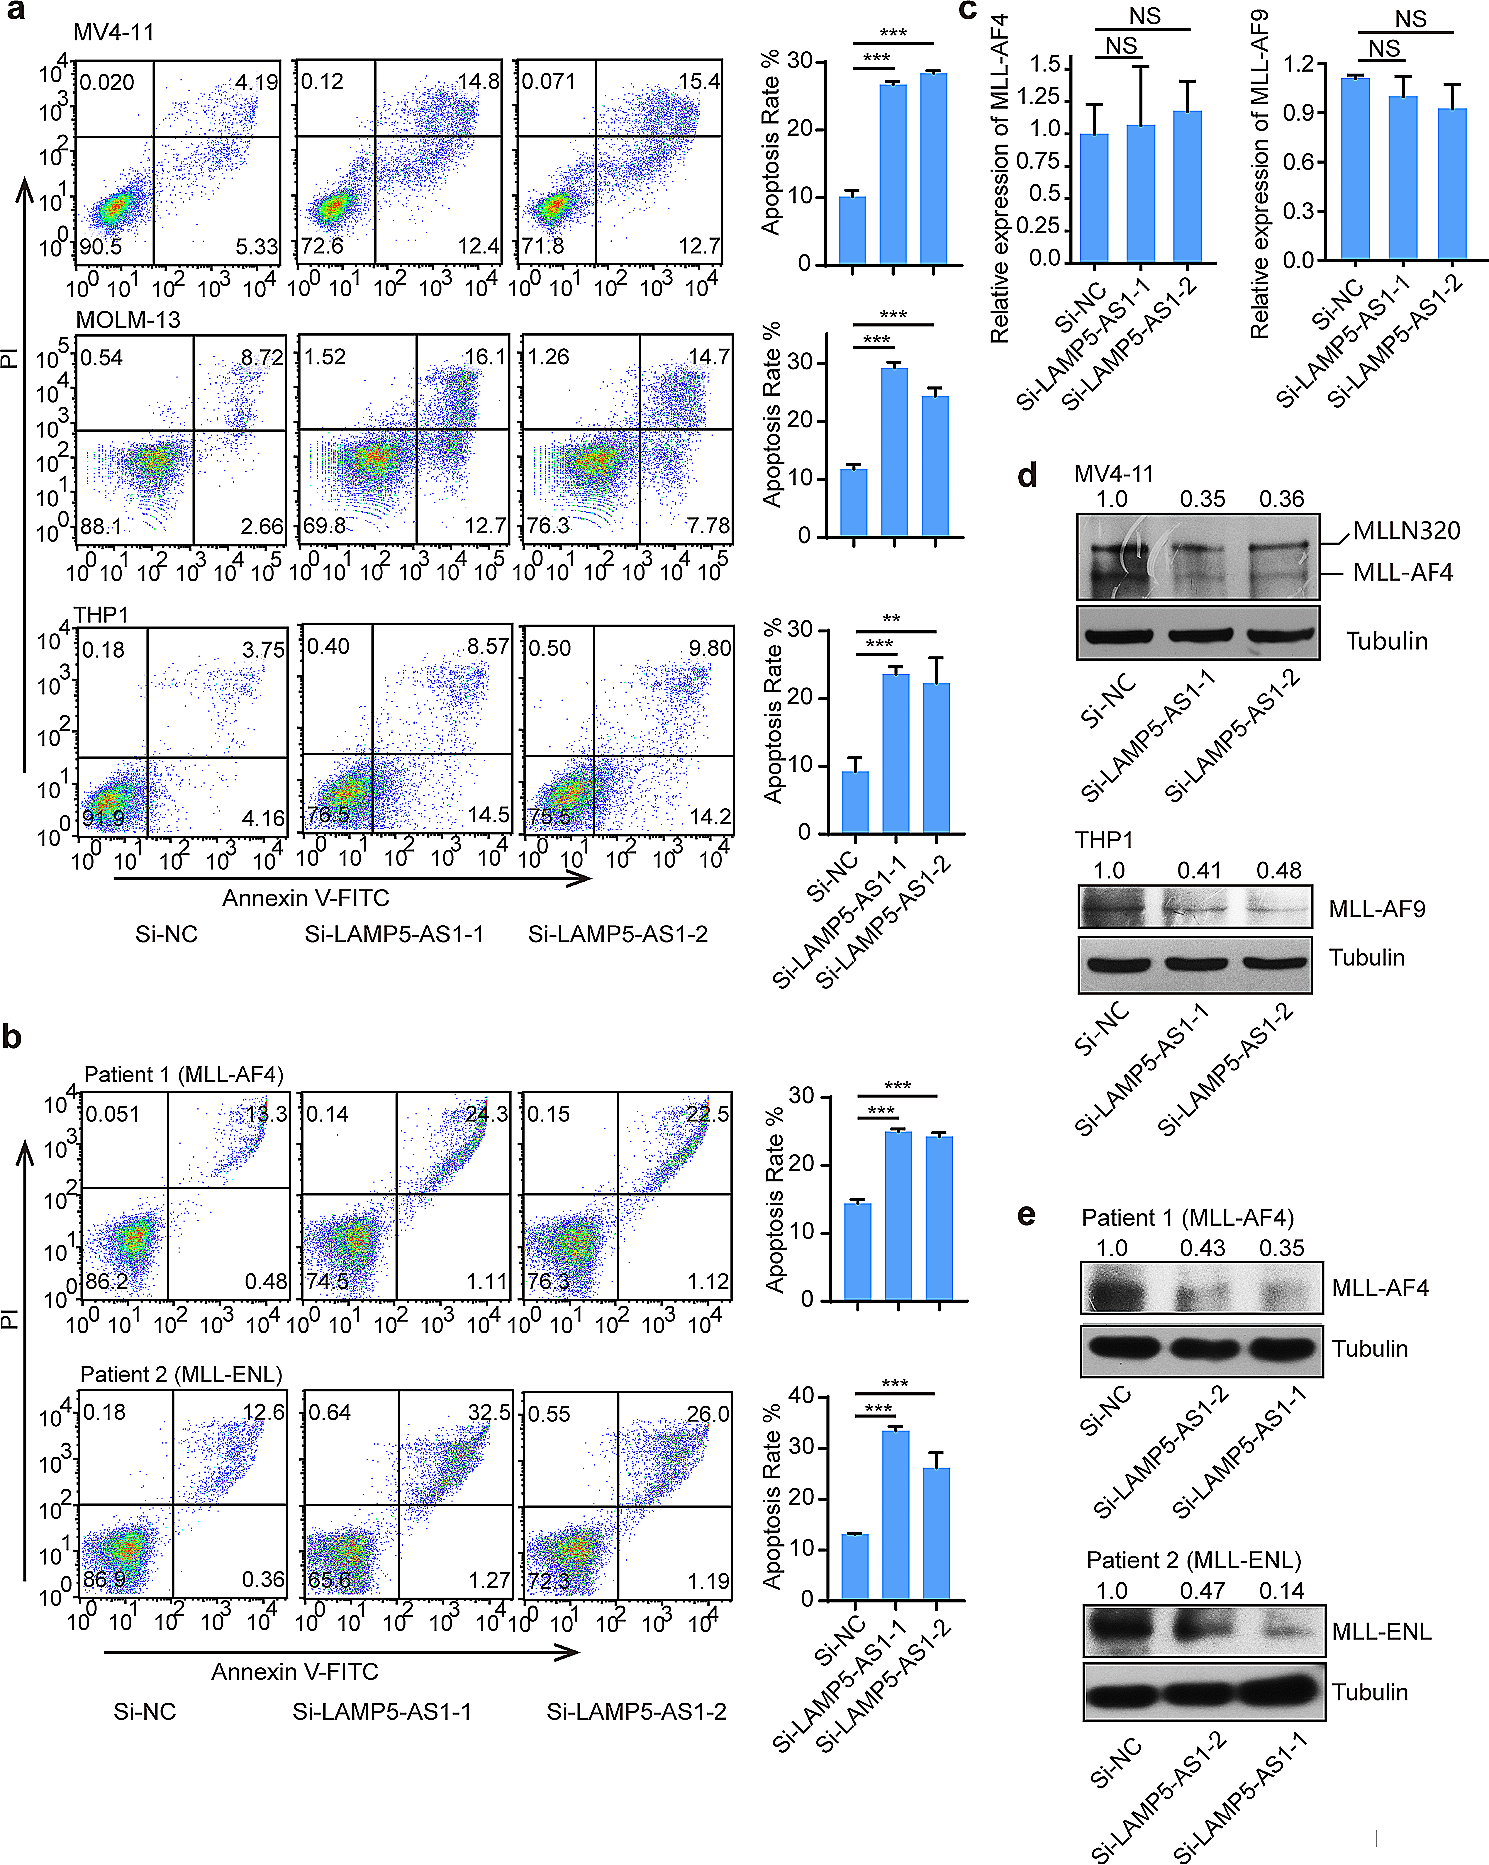 Blockade of the lncRNA-DOT1L-LAMP5 axis enhances autophagy and promotes degradation of MLL fusion proteins